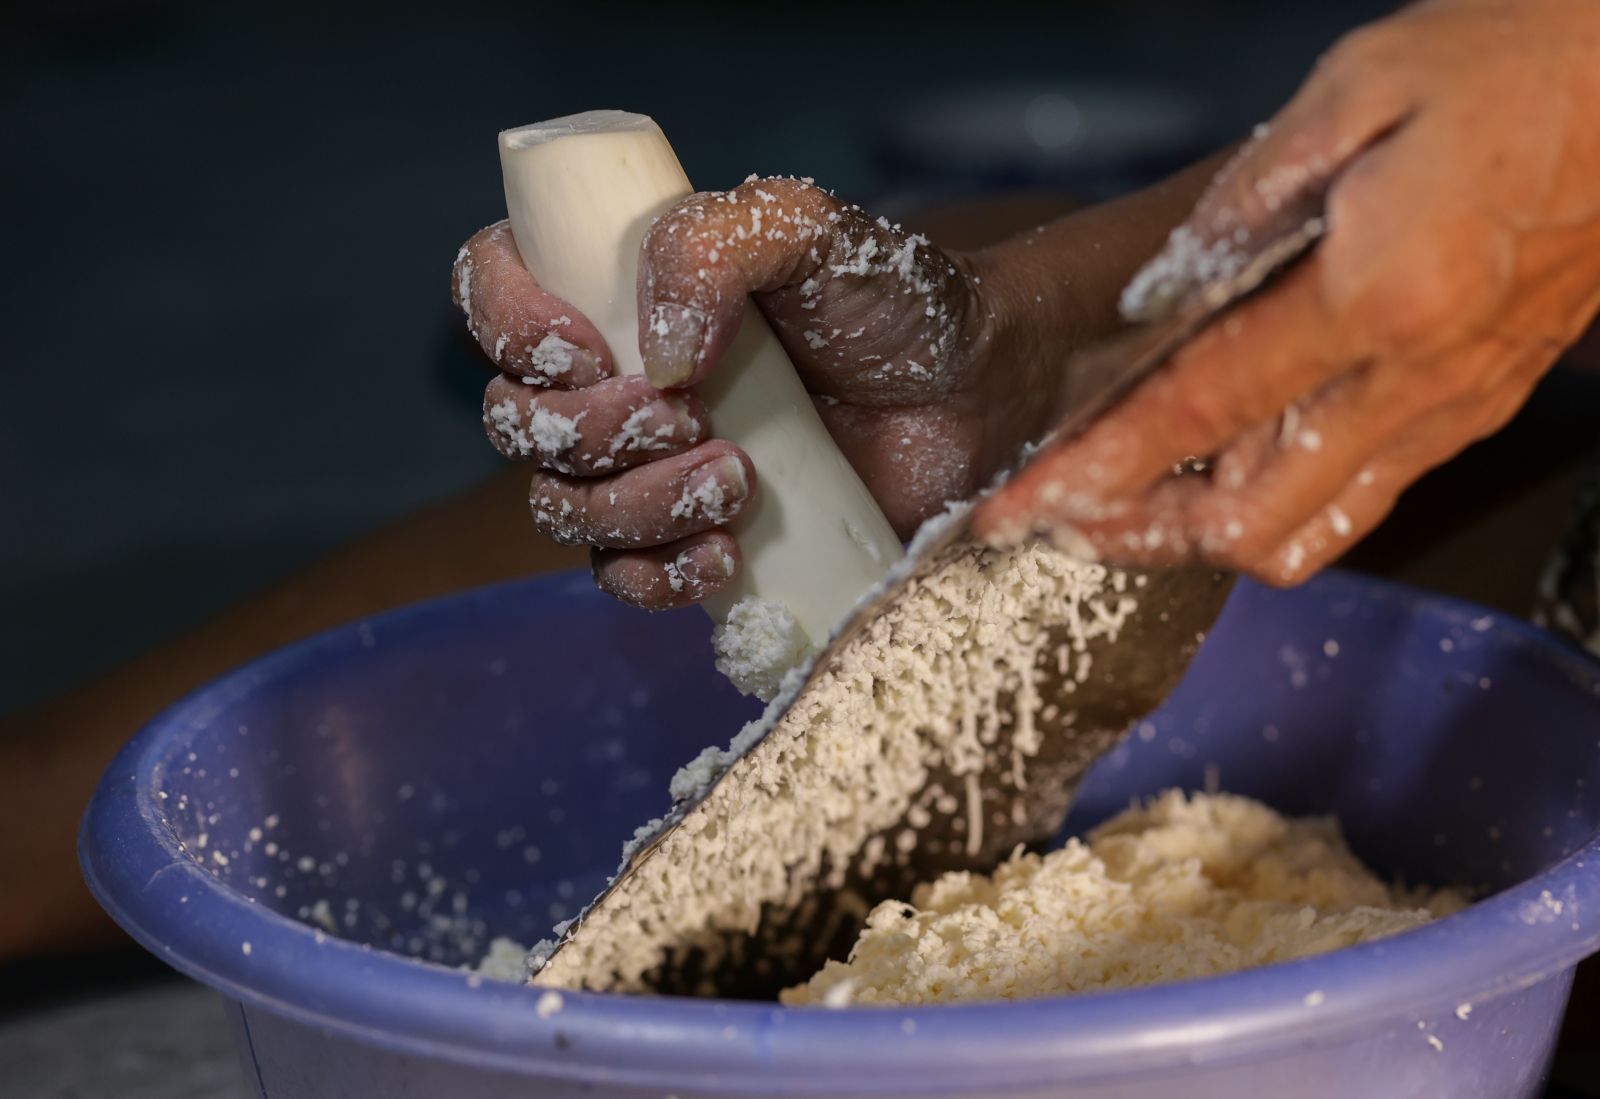 Grinding cassava by hand is very laborious